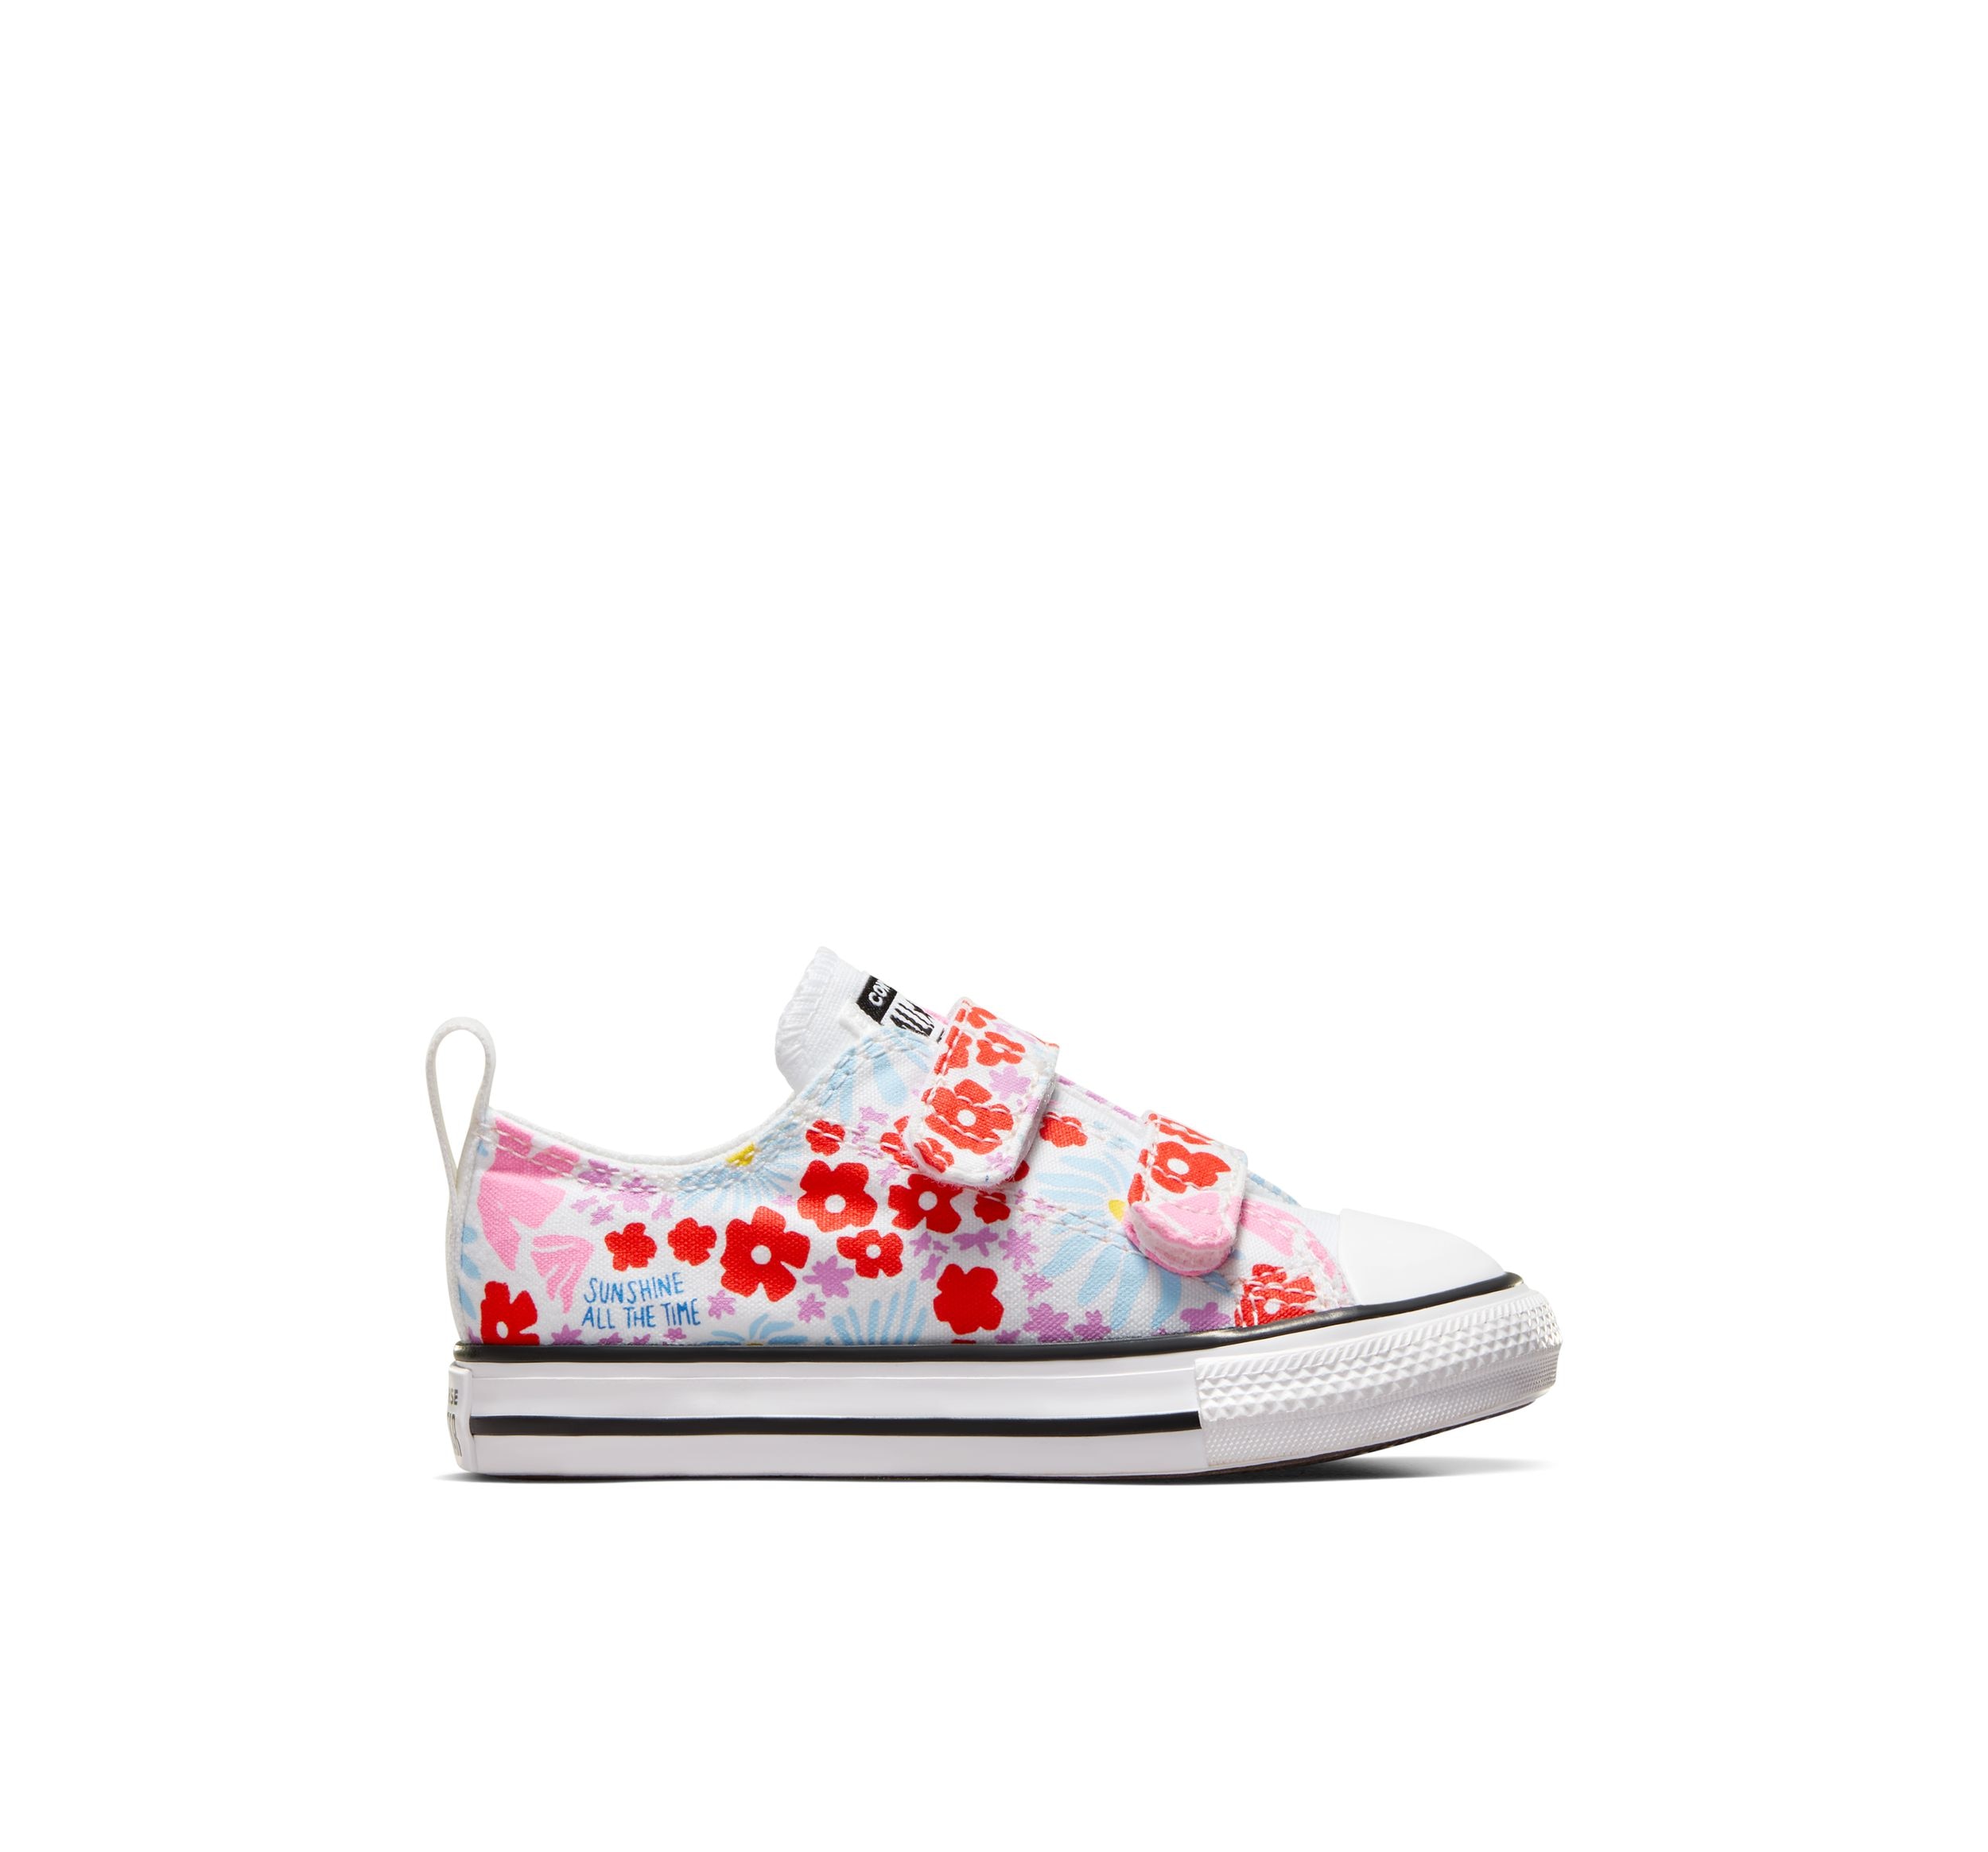 Image of Converse Toddler Girl's Chuck Taylor All Star 2V Shoes